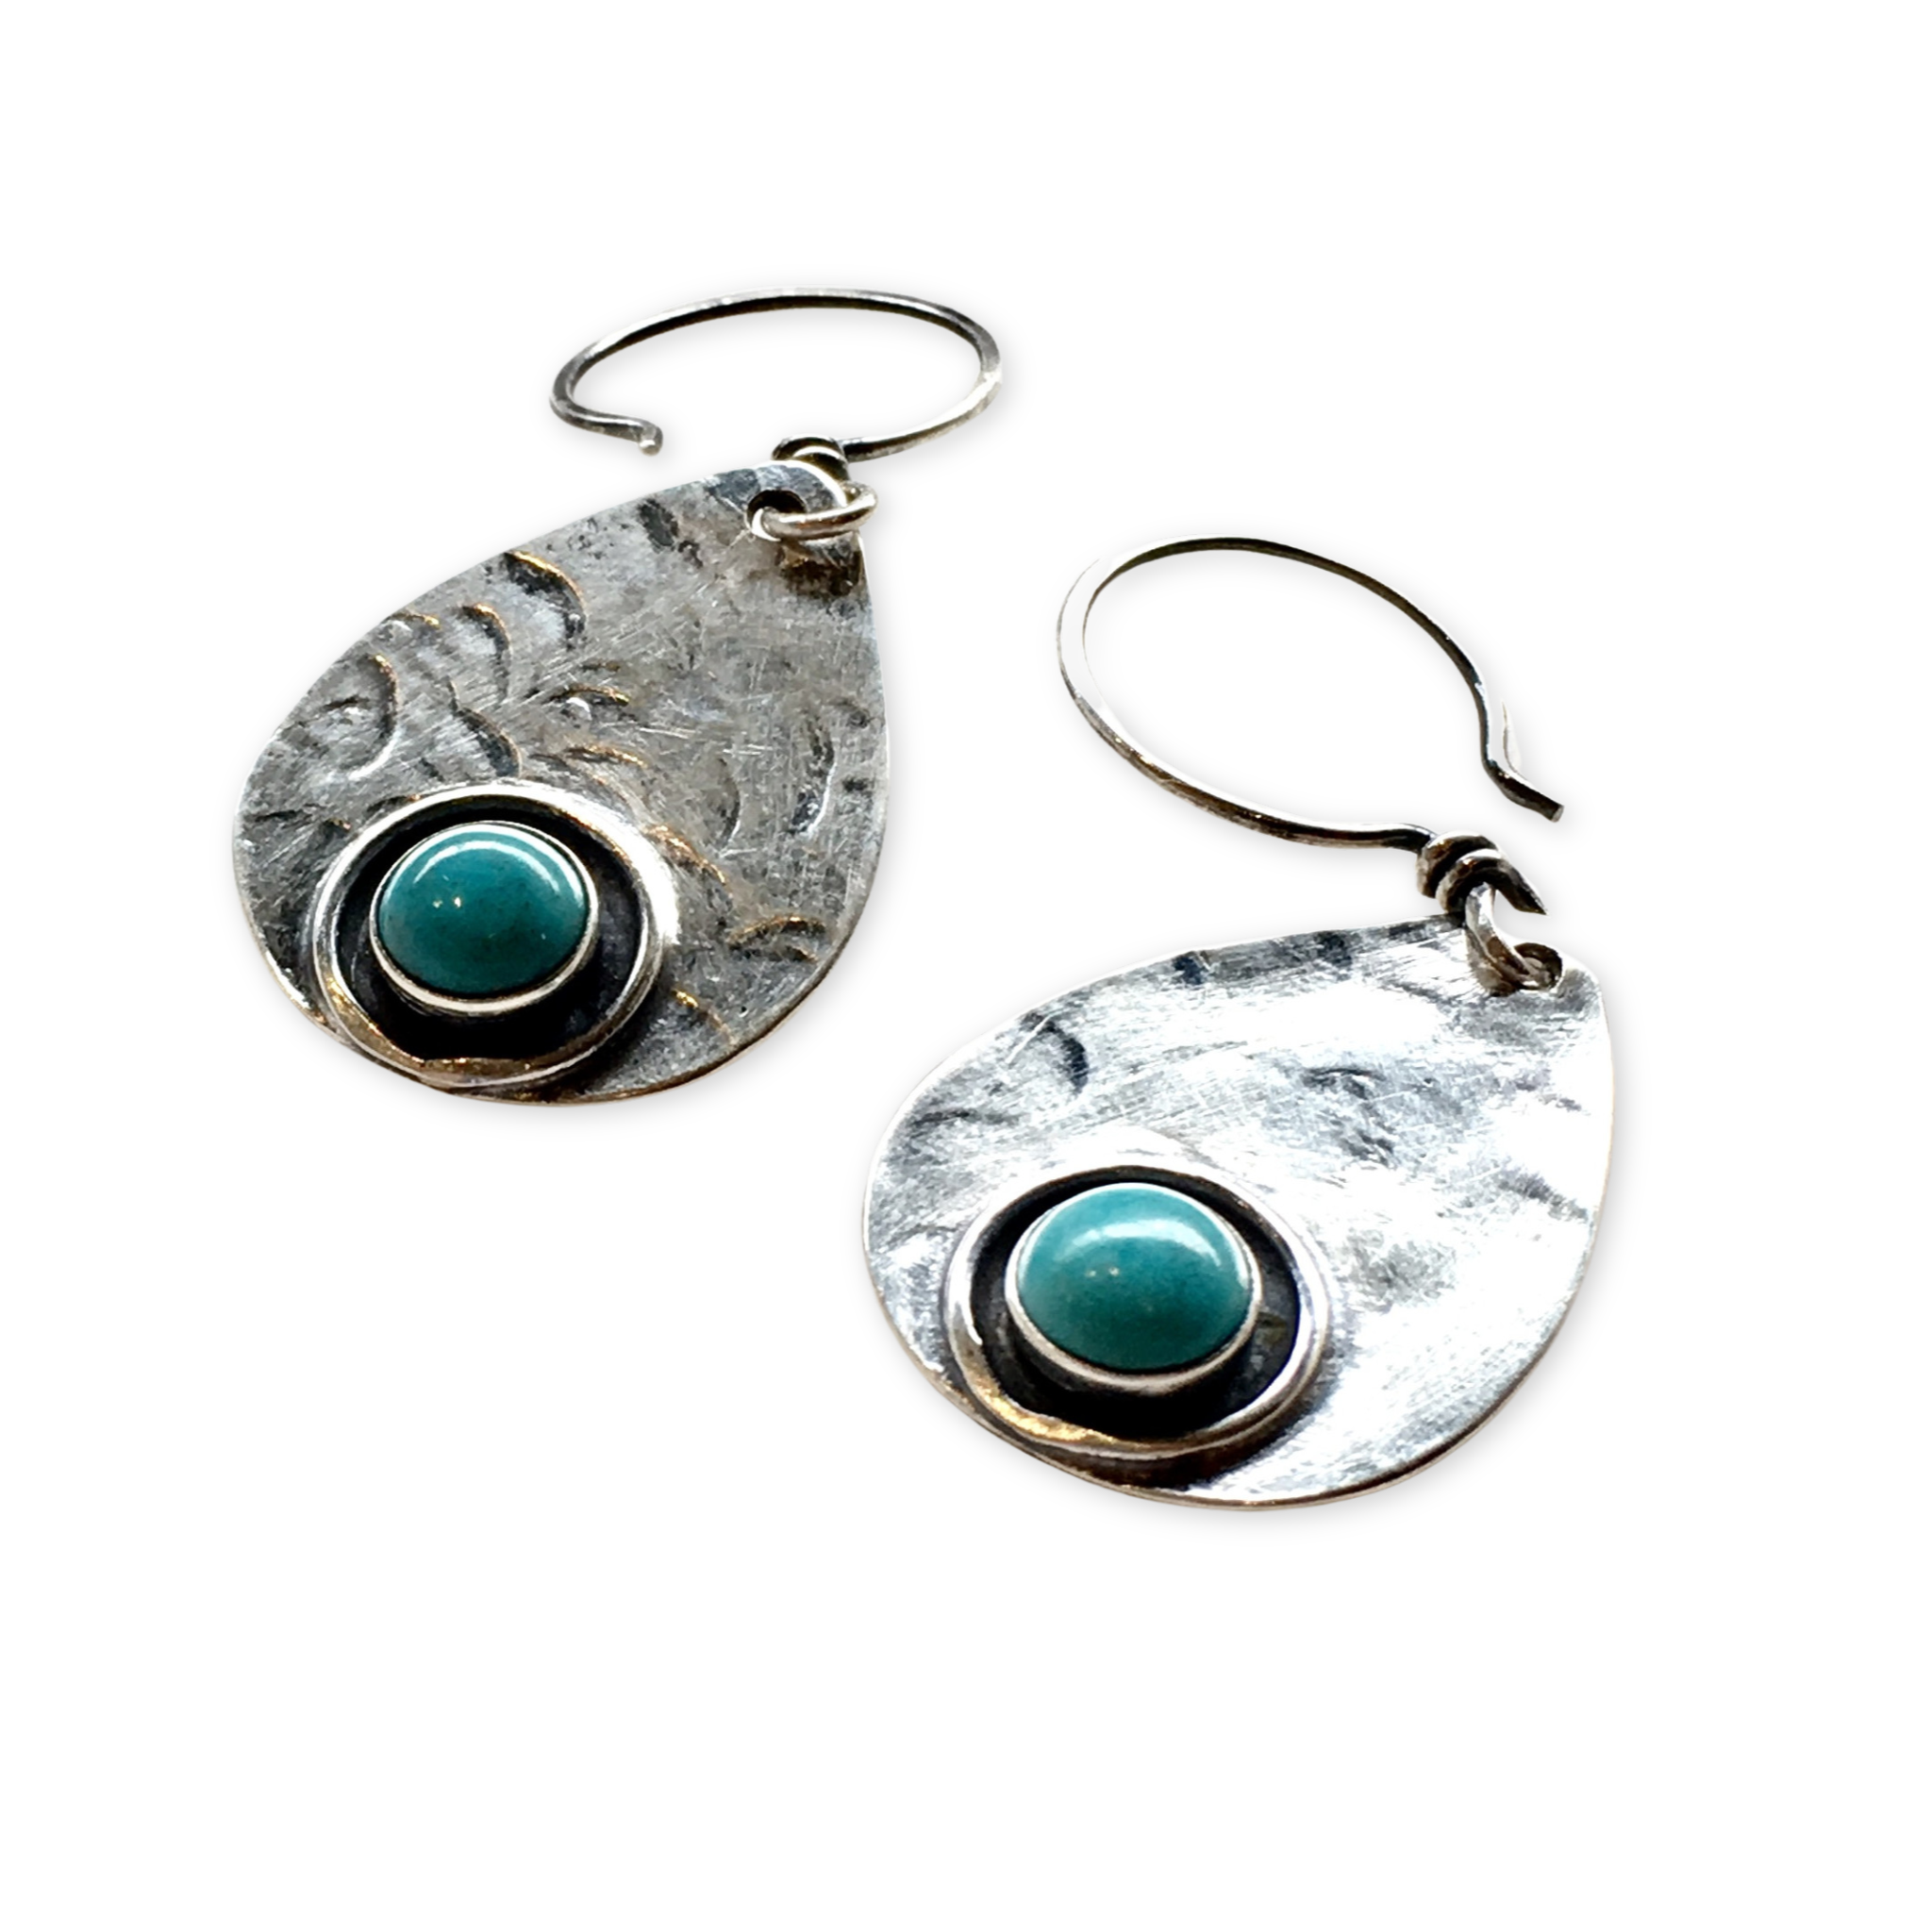 silver stamped teardrop shaped earrings with turquoise